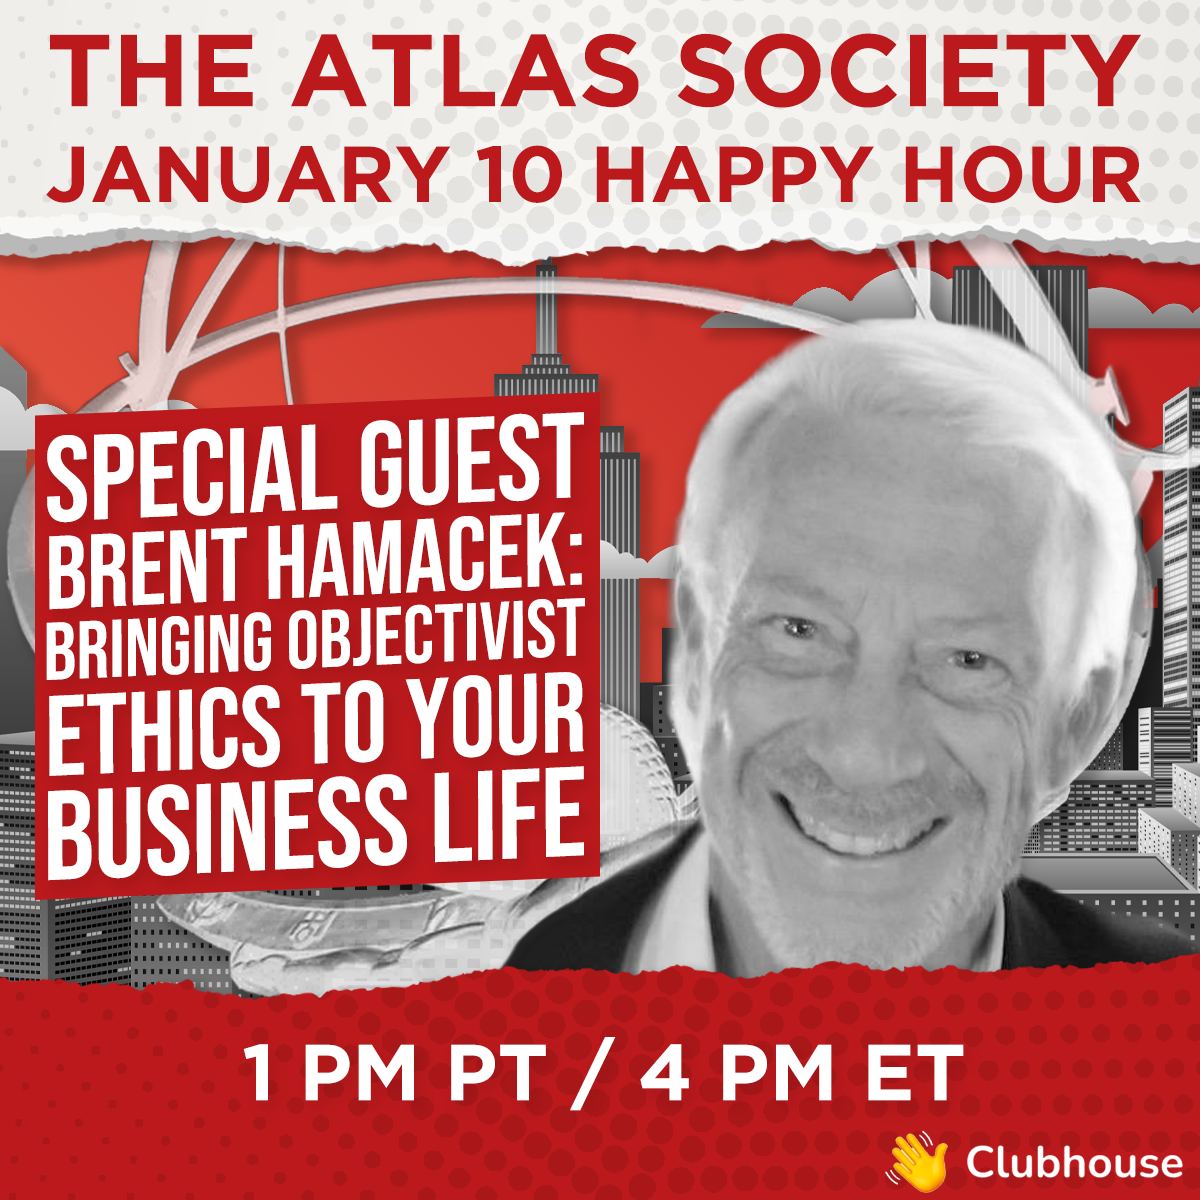 Bringing Objectivist Ethics to Your Business Life w/ Special Guest Brent Hamacek